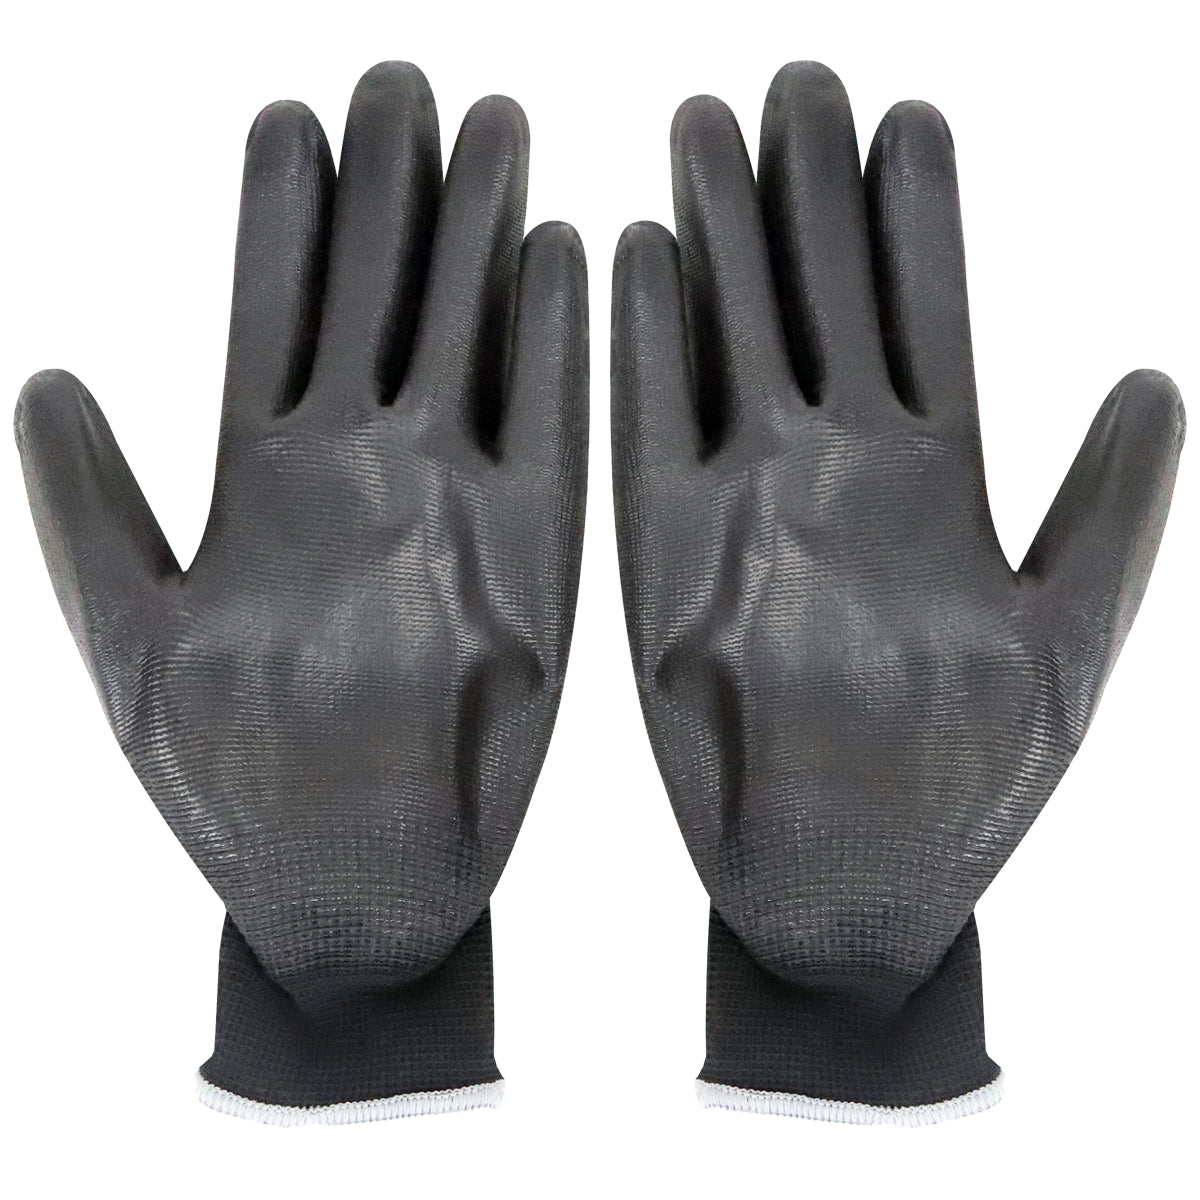 Excel Durable Grip Working Gloves Black Size L Pack of 48